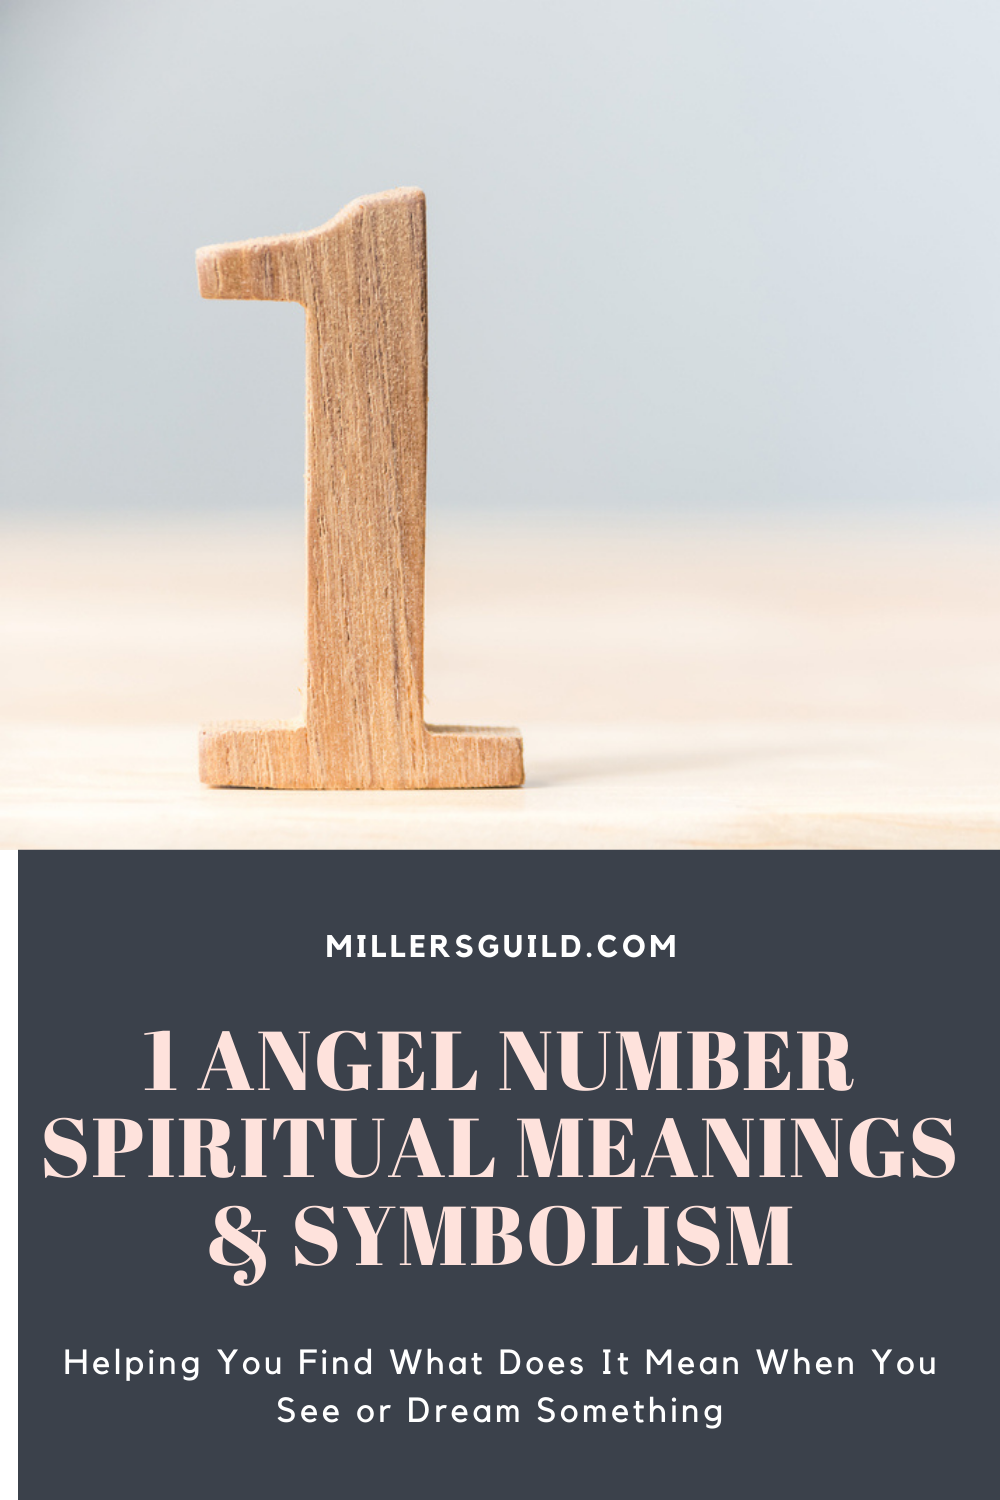 1 Angel Number Spiritual Meanings & Symbolism 1